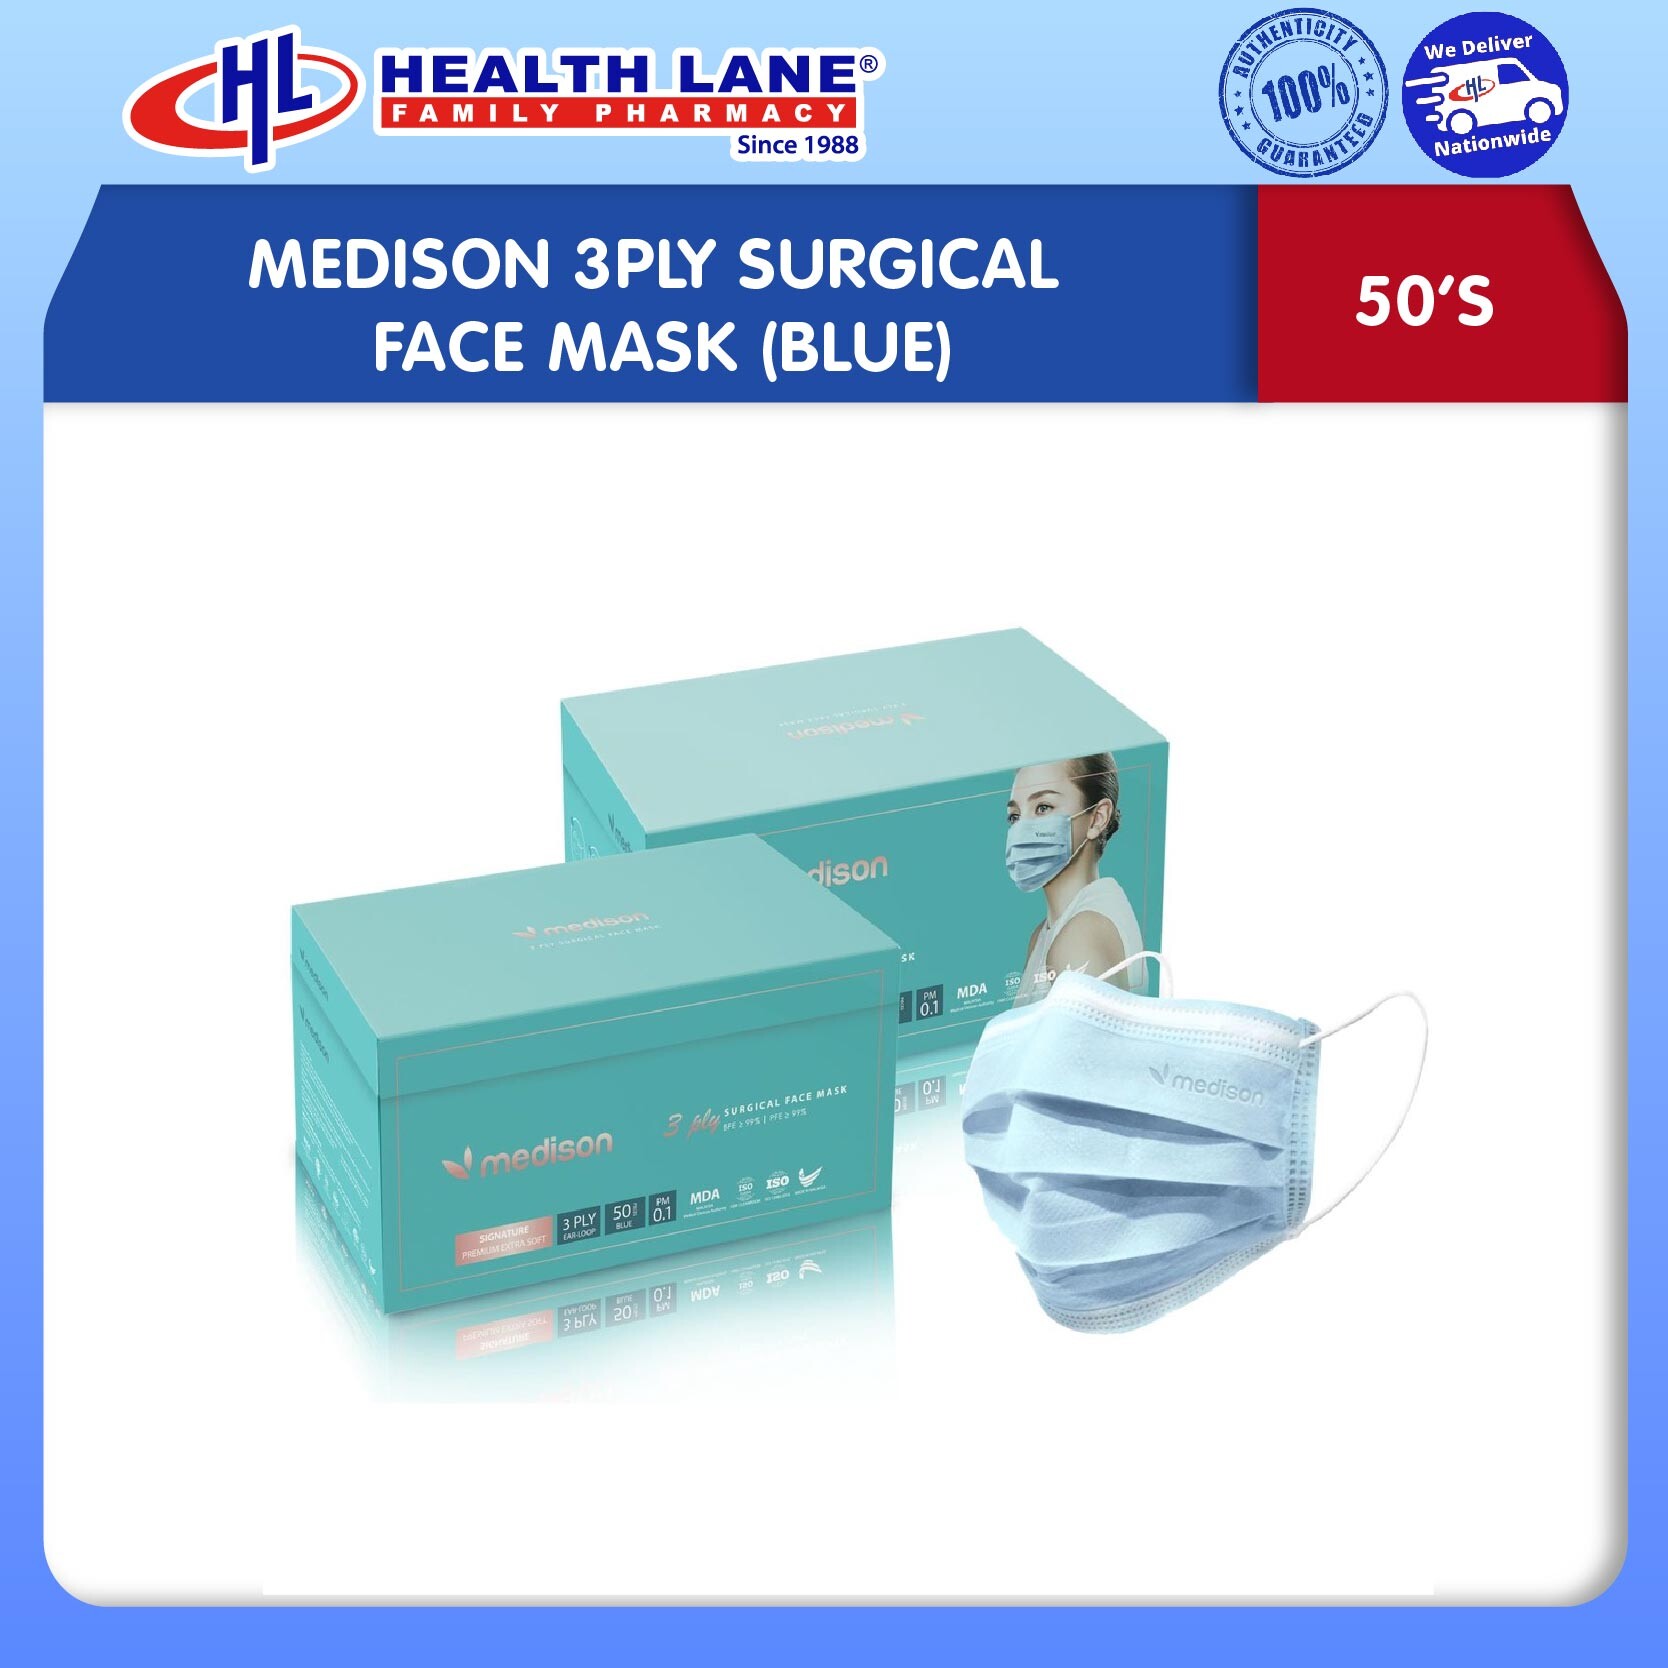 MEDISON 3PLY SURGICAL FACE MASK (BLUE) 50'S